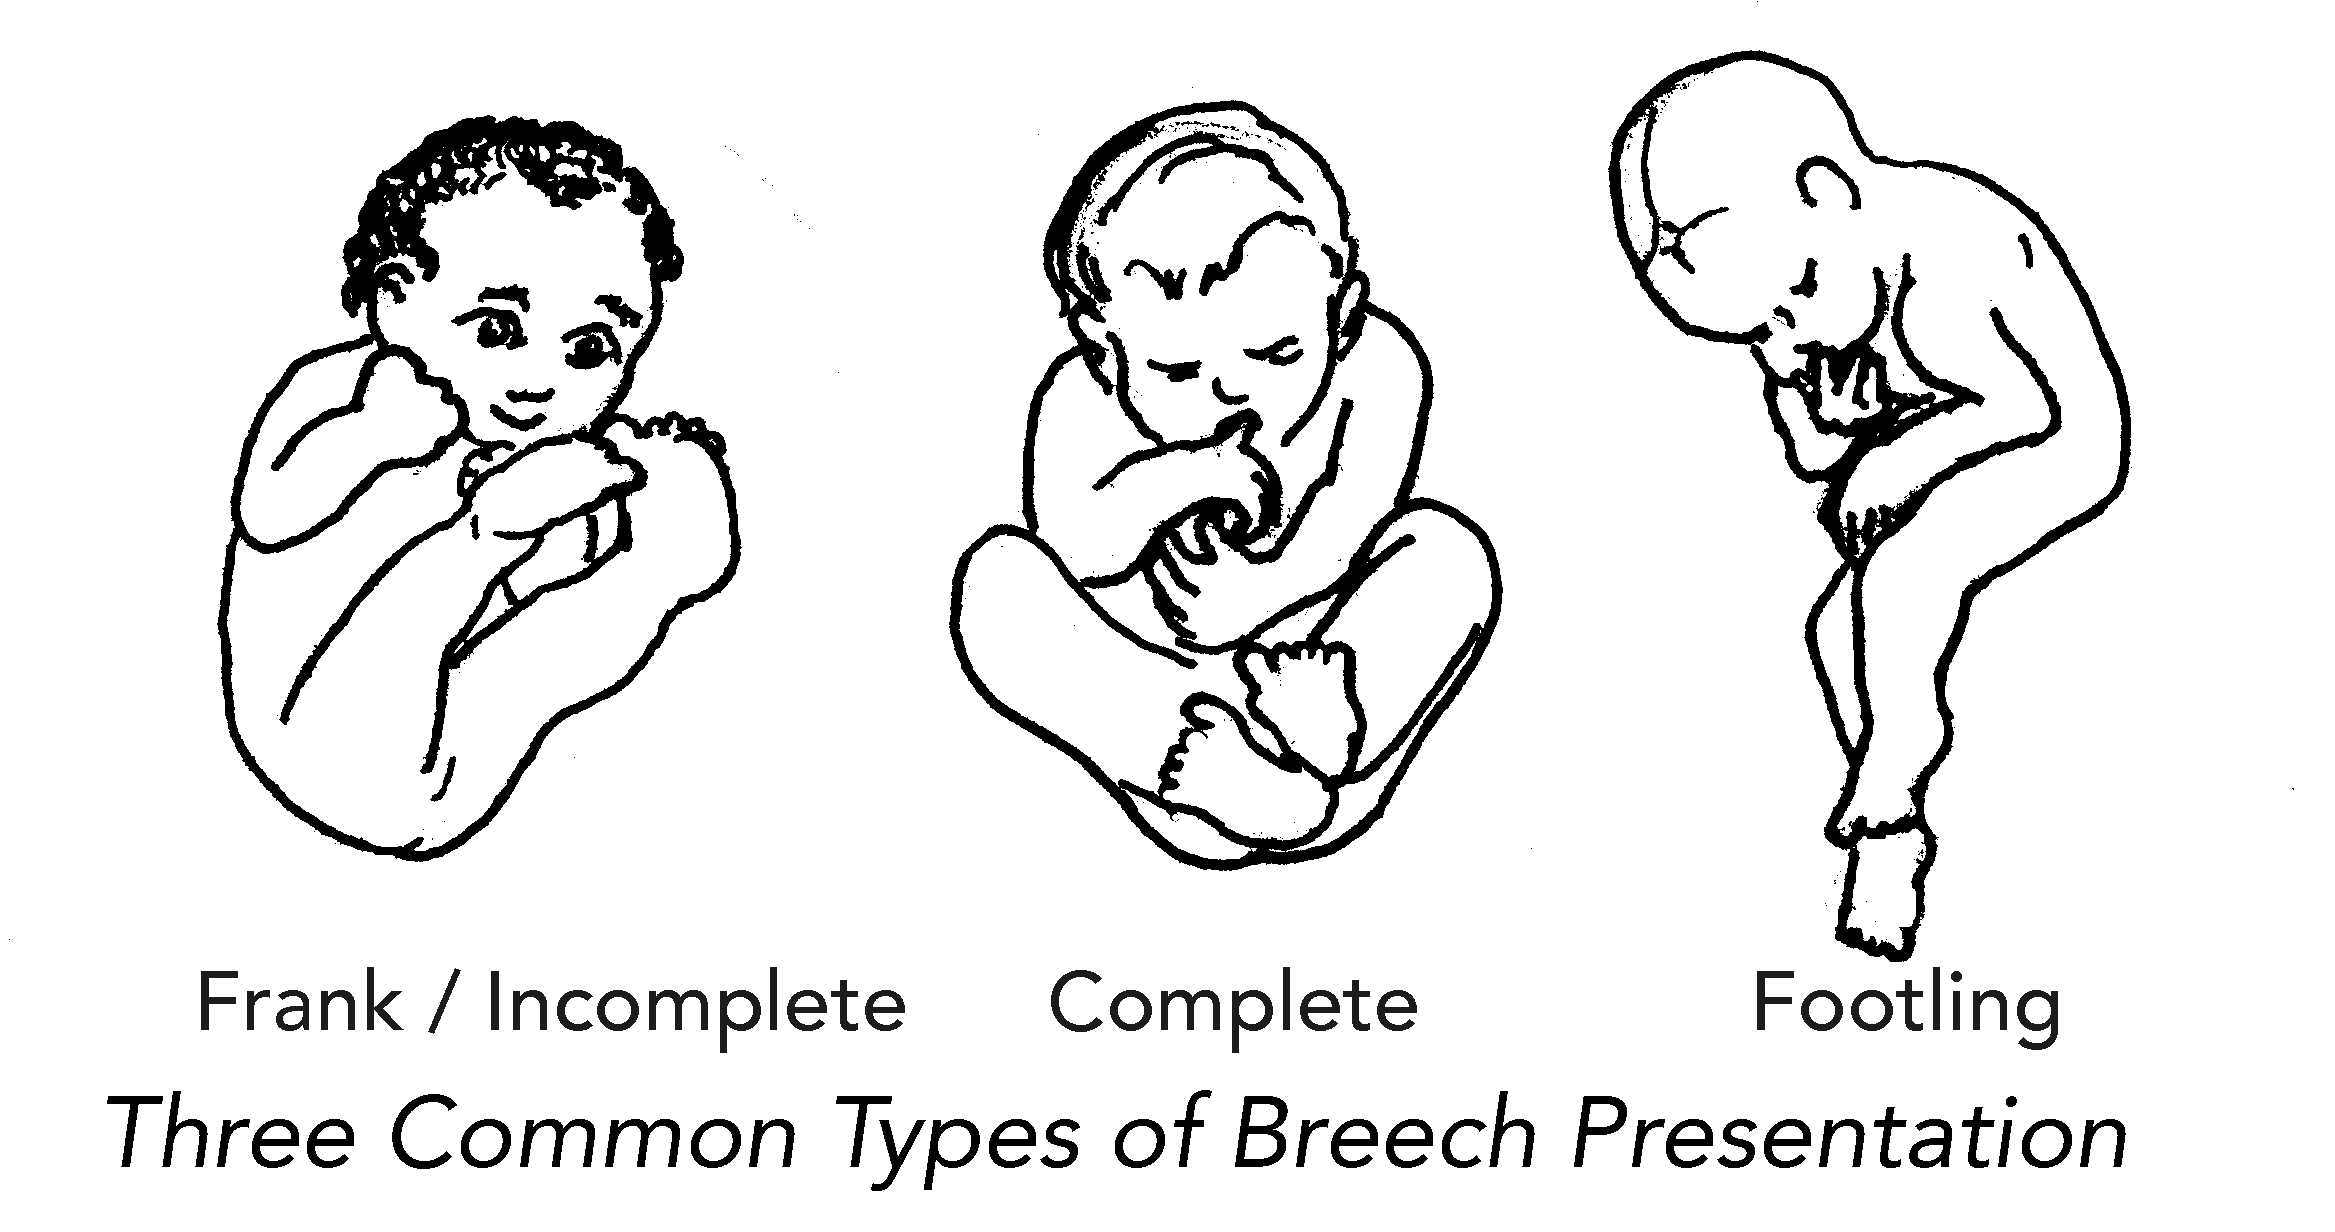 Baby position in 8th month of